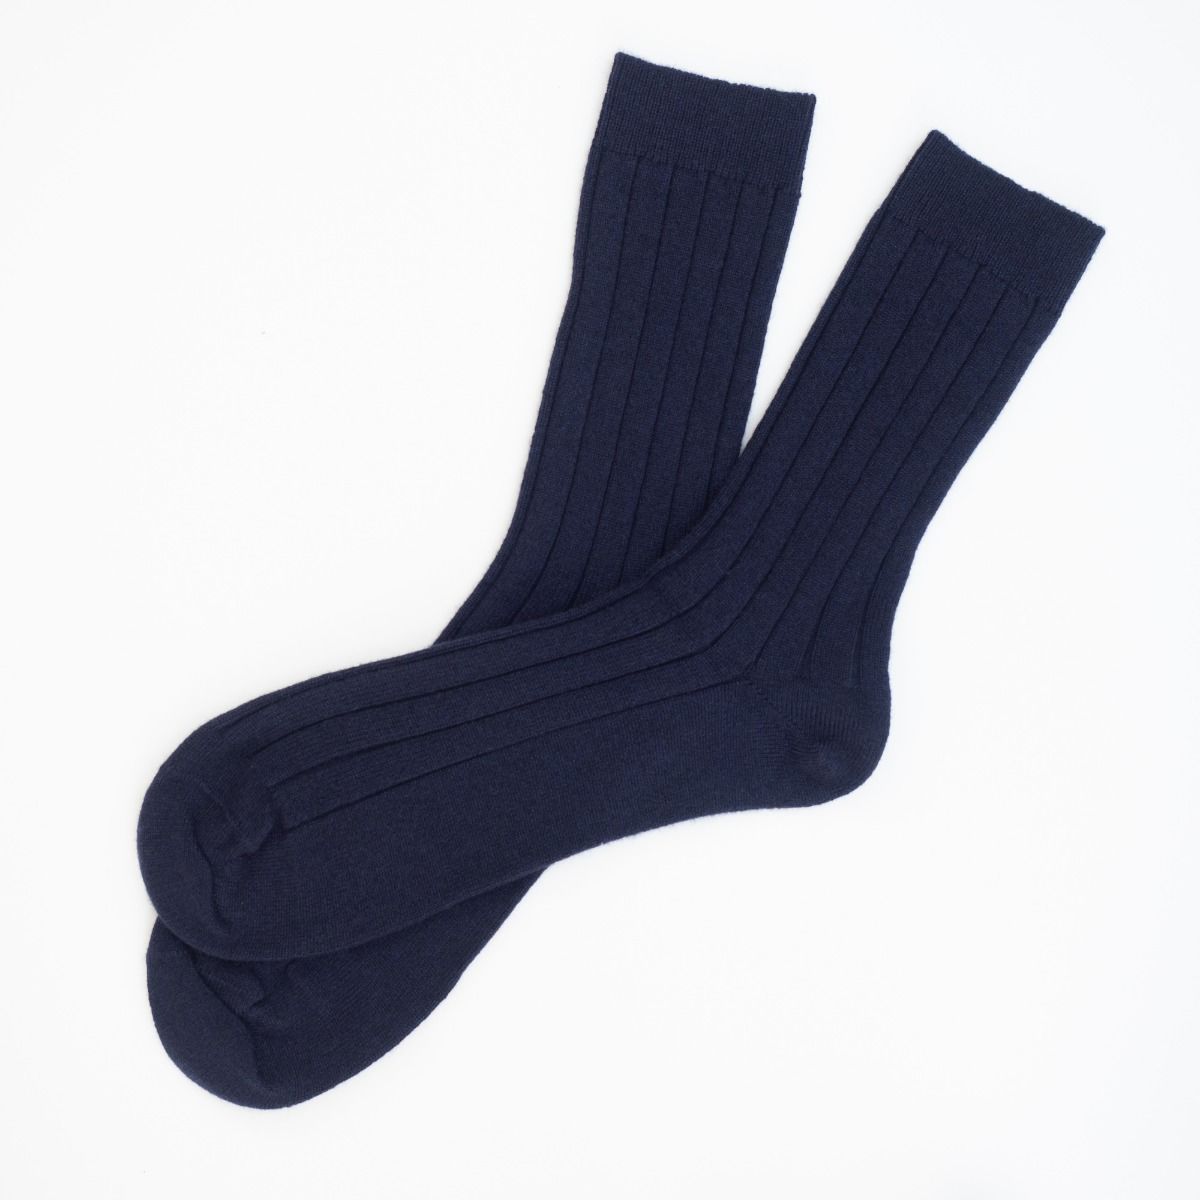 Men's Navy Blue Cashmere Bed Socks | The Travelwrap Company